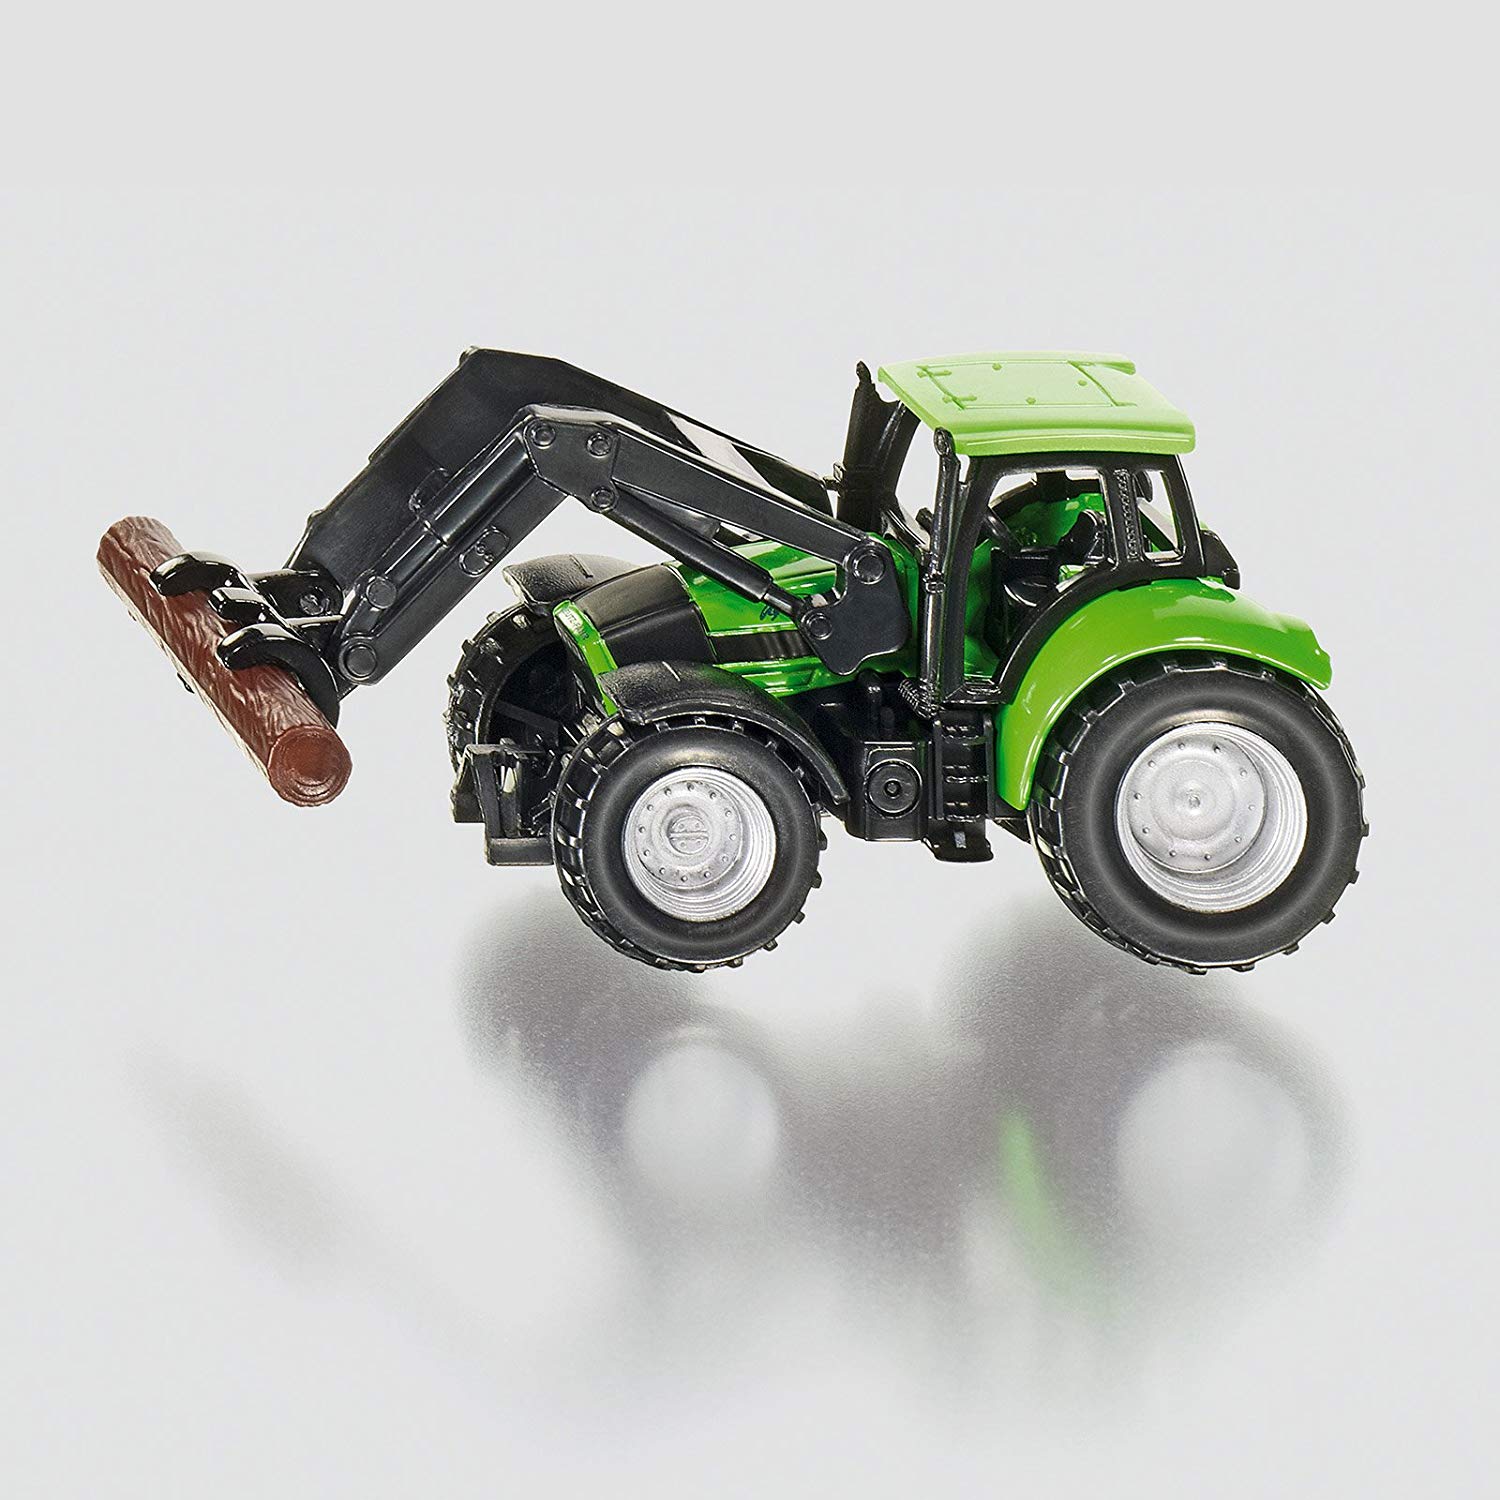 Deutz Fahr Agrotron Ttv With Front Loader And Tree Trunk Grapple